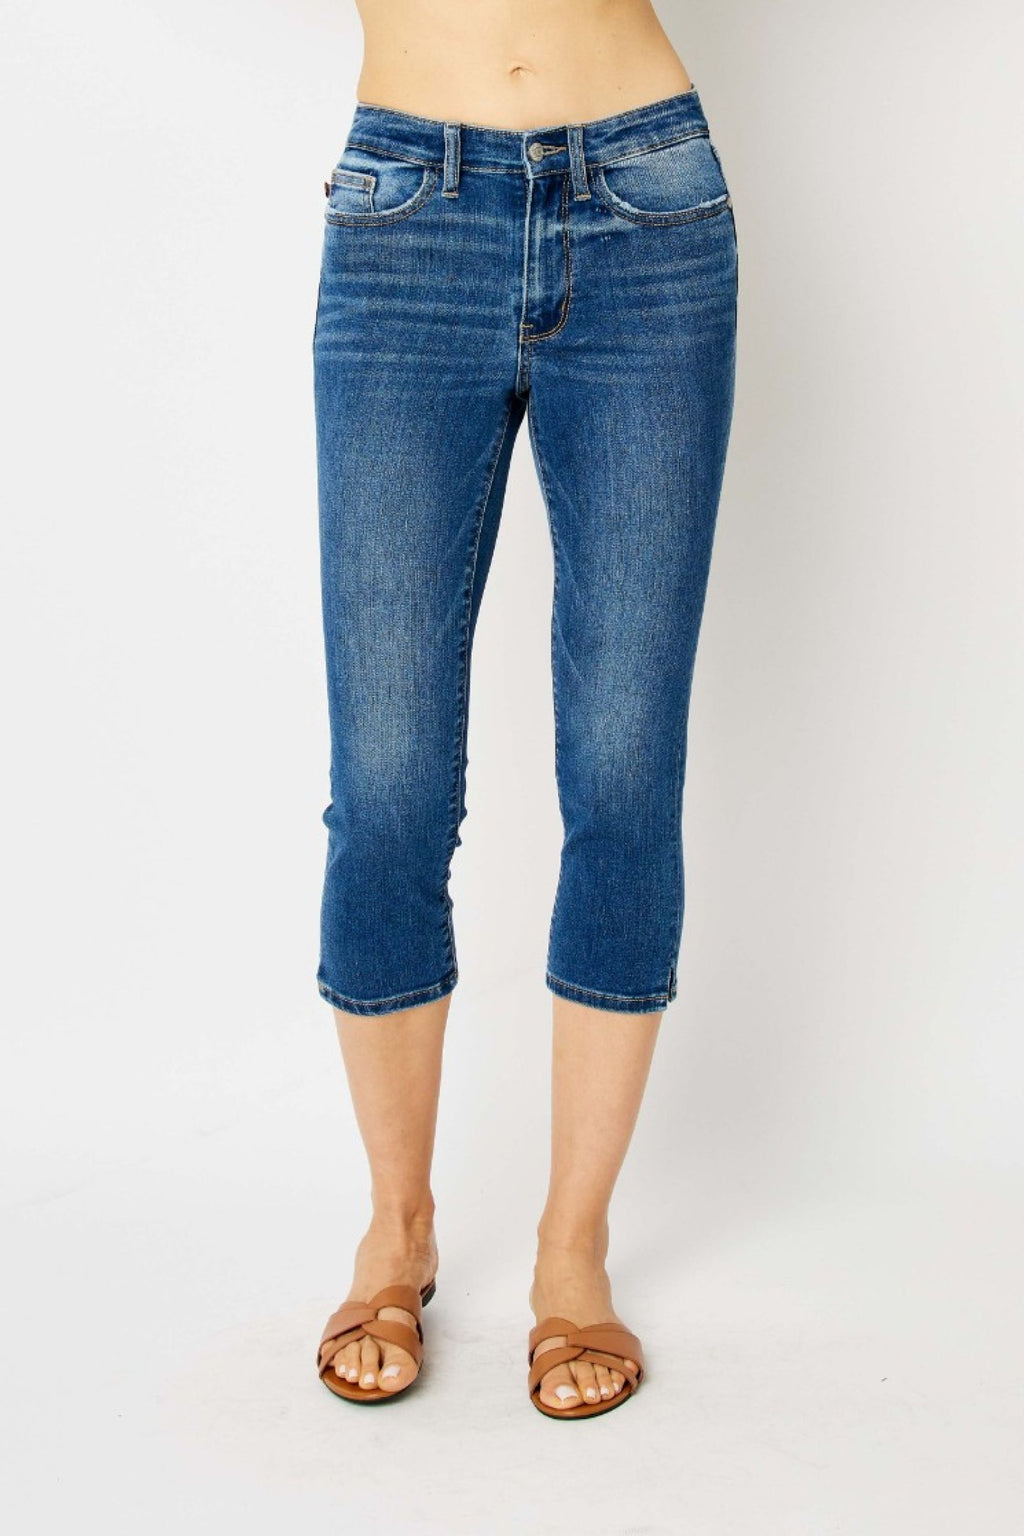 JUDY BLUE MIDRISE CAPRI WITH SIDE SLIT JEANS